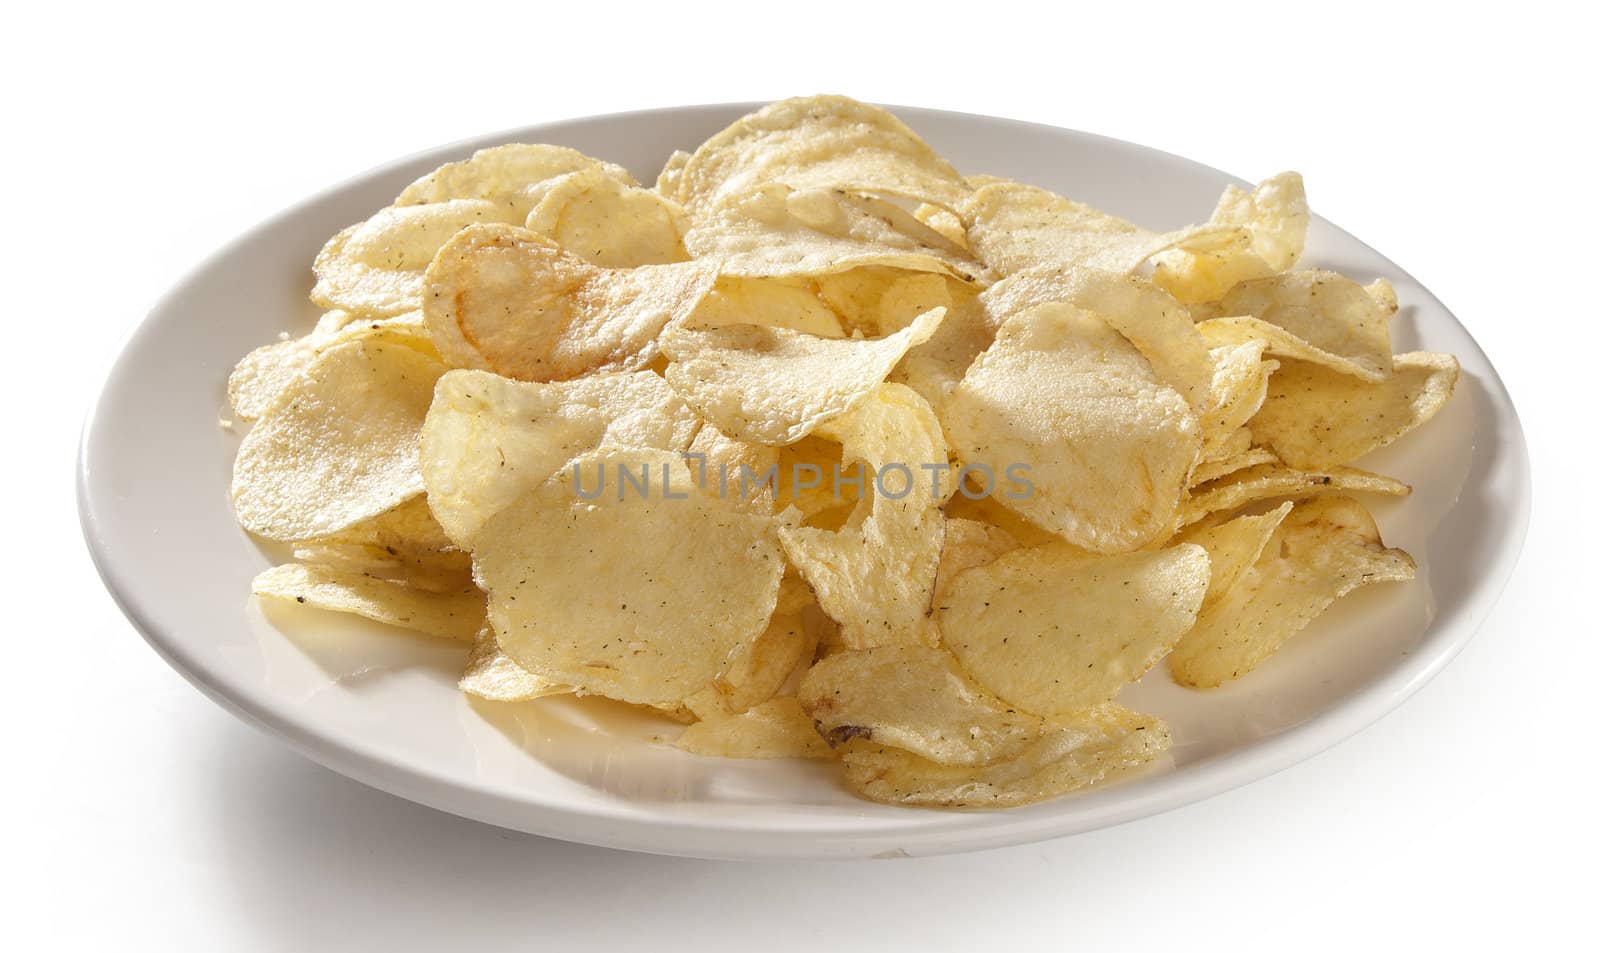 Some potato chips on the white plate